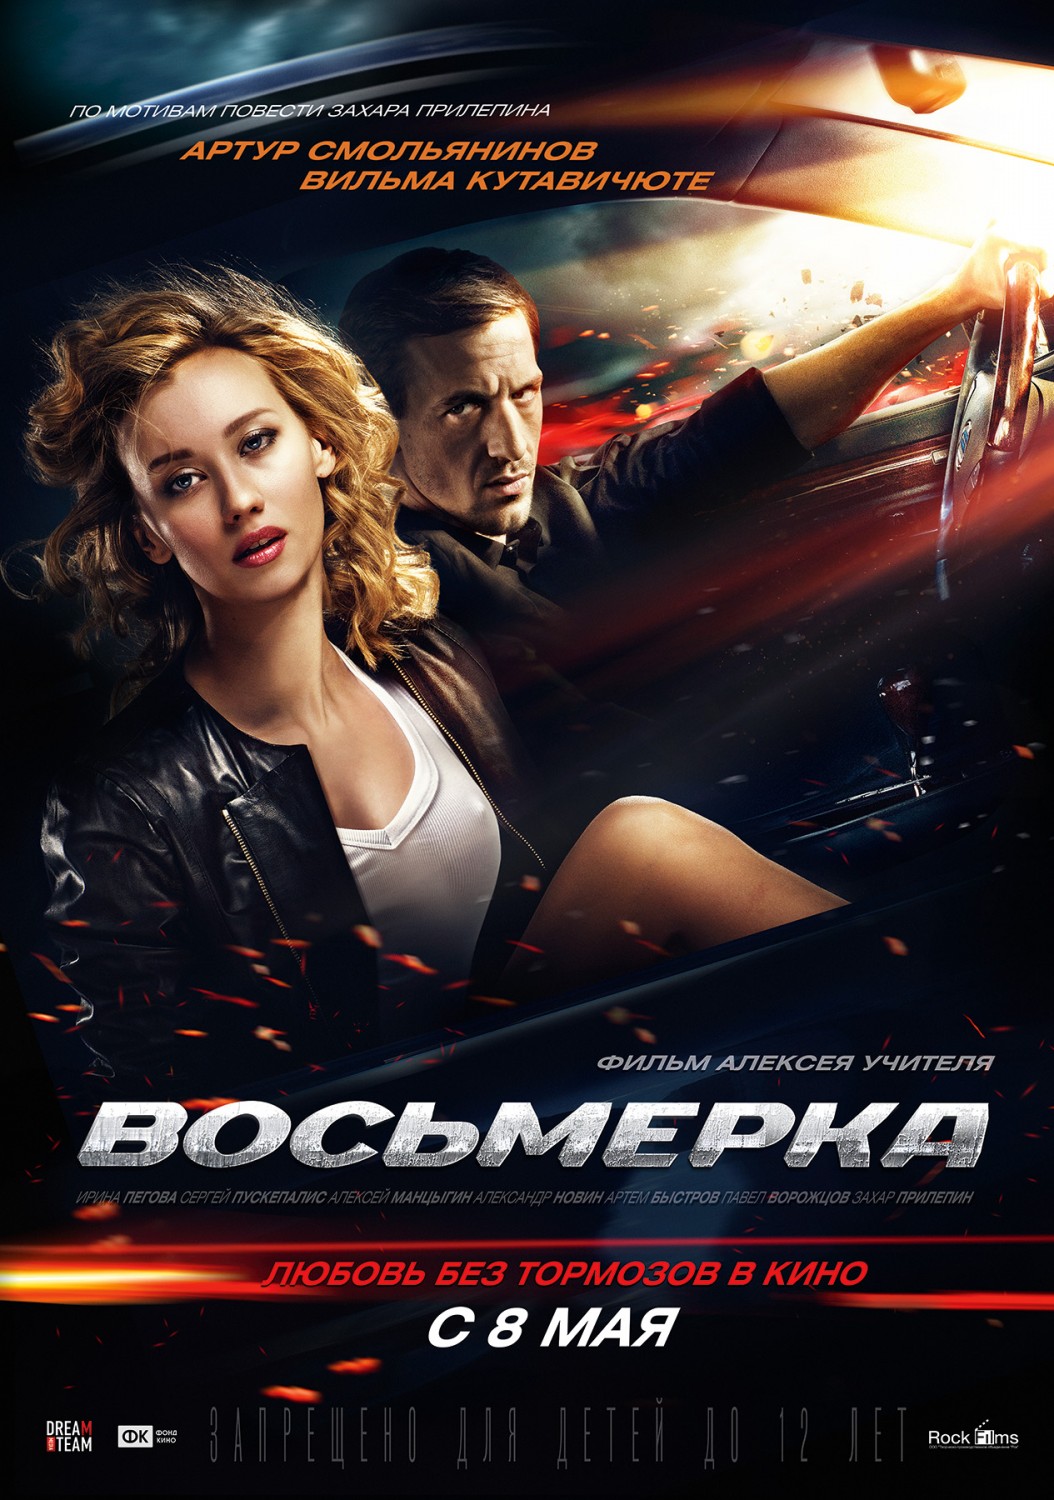 Extra Large Movie Poster Image for Vosmerka 